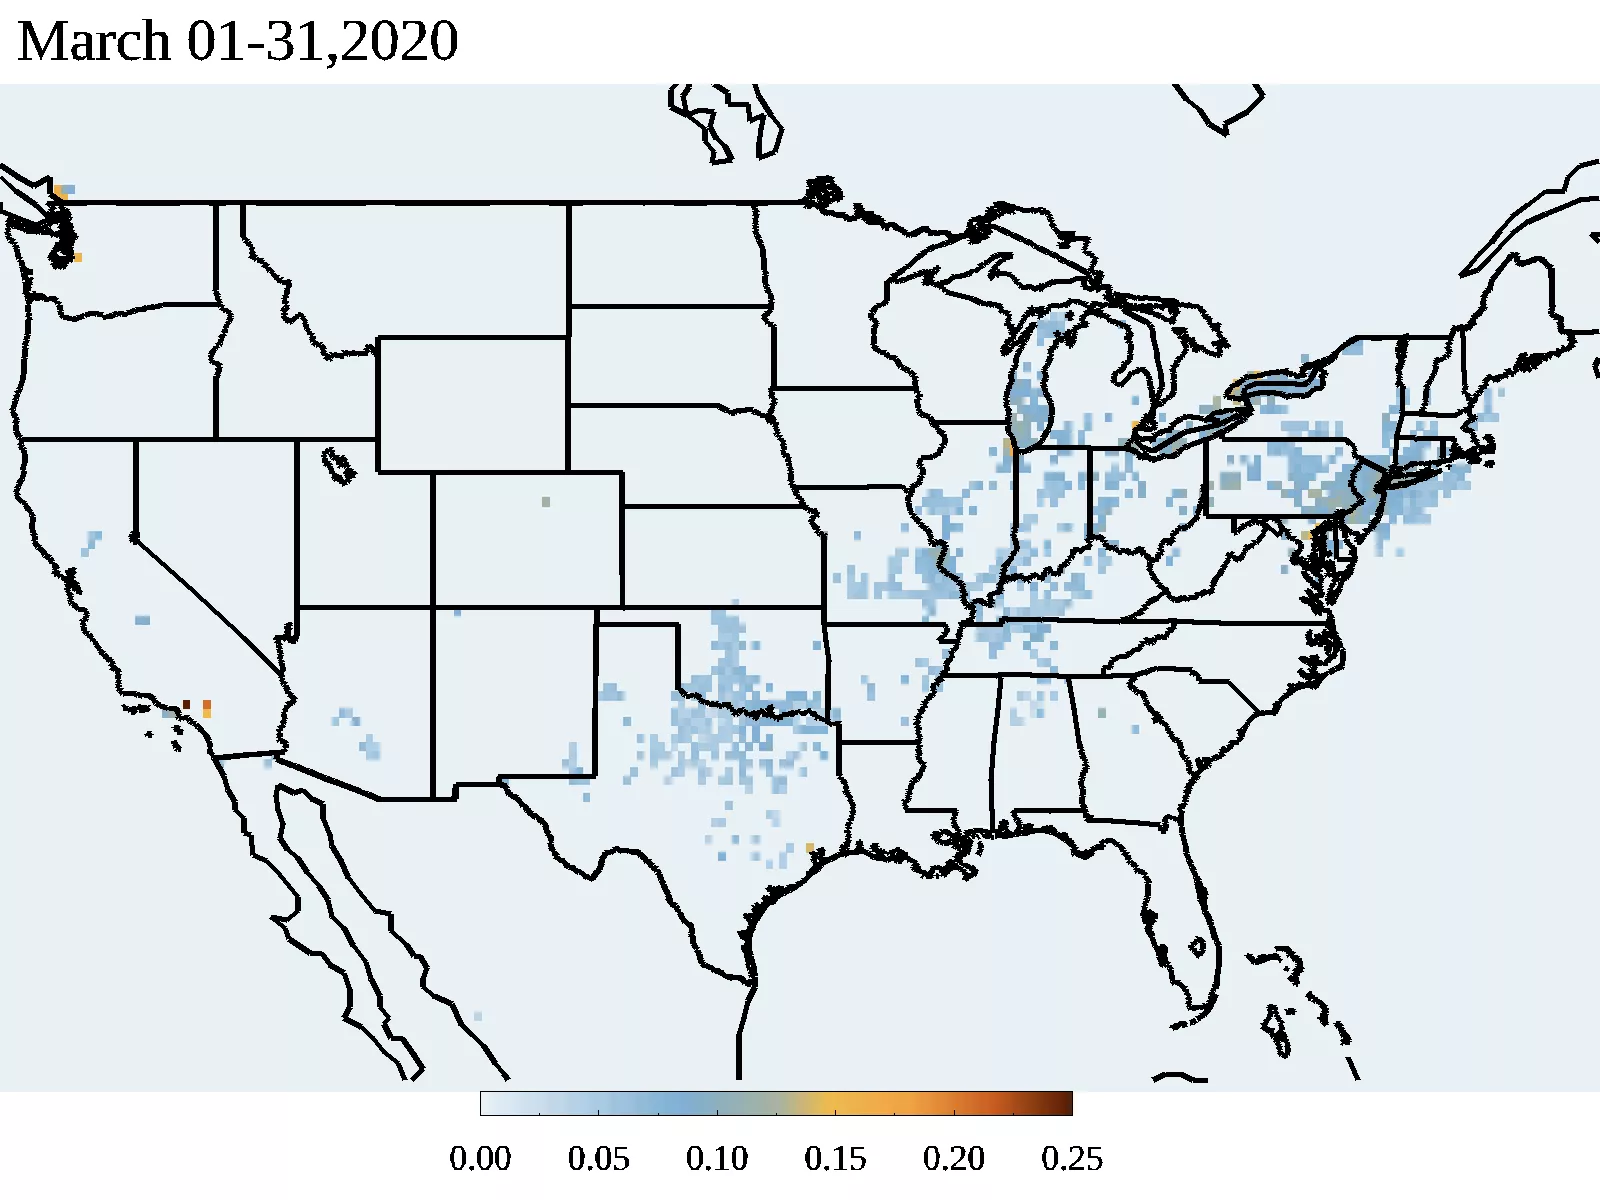 Airborne particle pollution over the US in March 2020 in shades of blue to deep orange; there is almost no orange (indicating highest concentrations) on the map at all; the blue is most prevalent over the Mid-Atlantic, the Great Lakes Region and Oklahoma/Texas